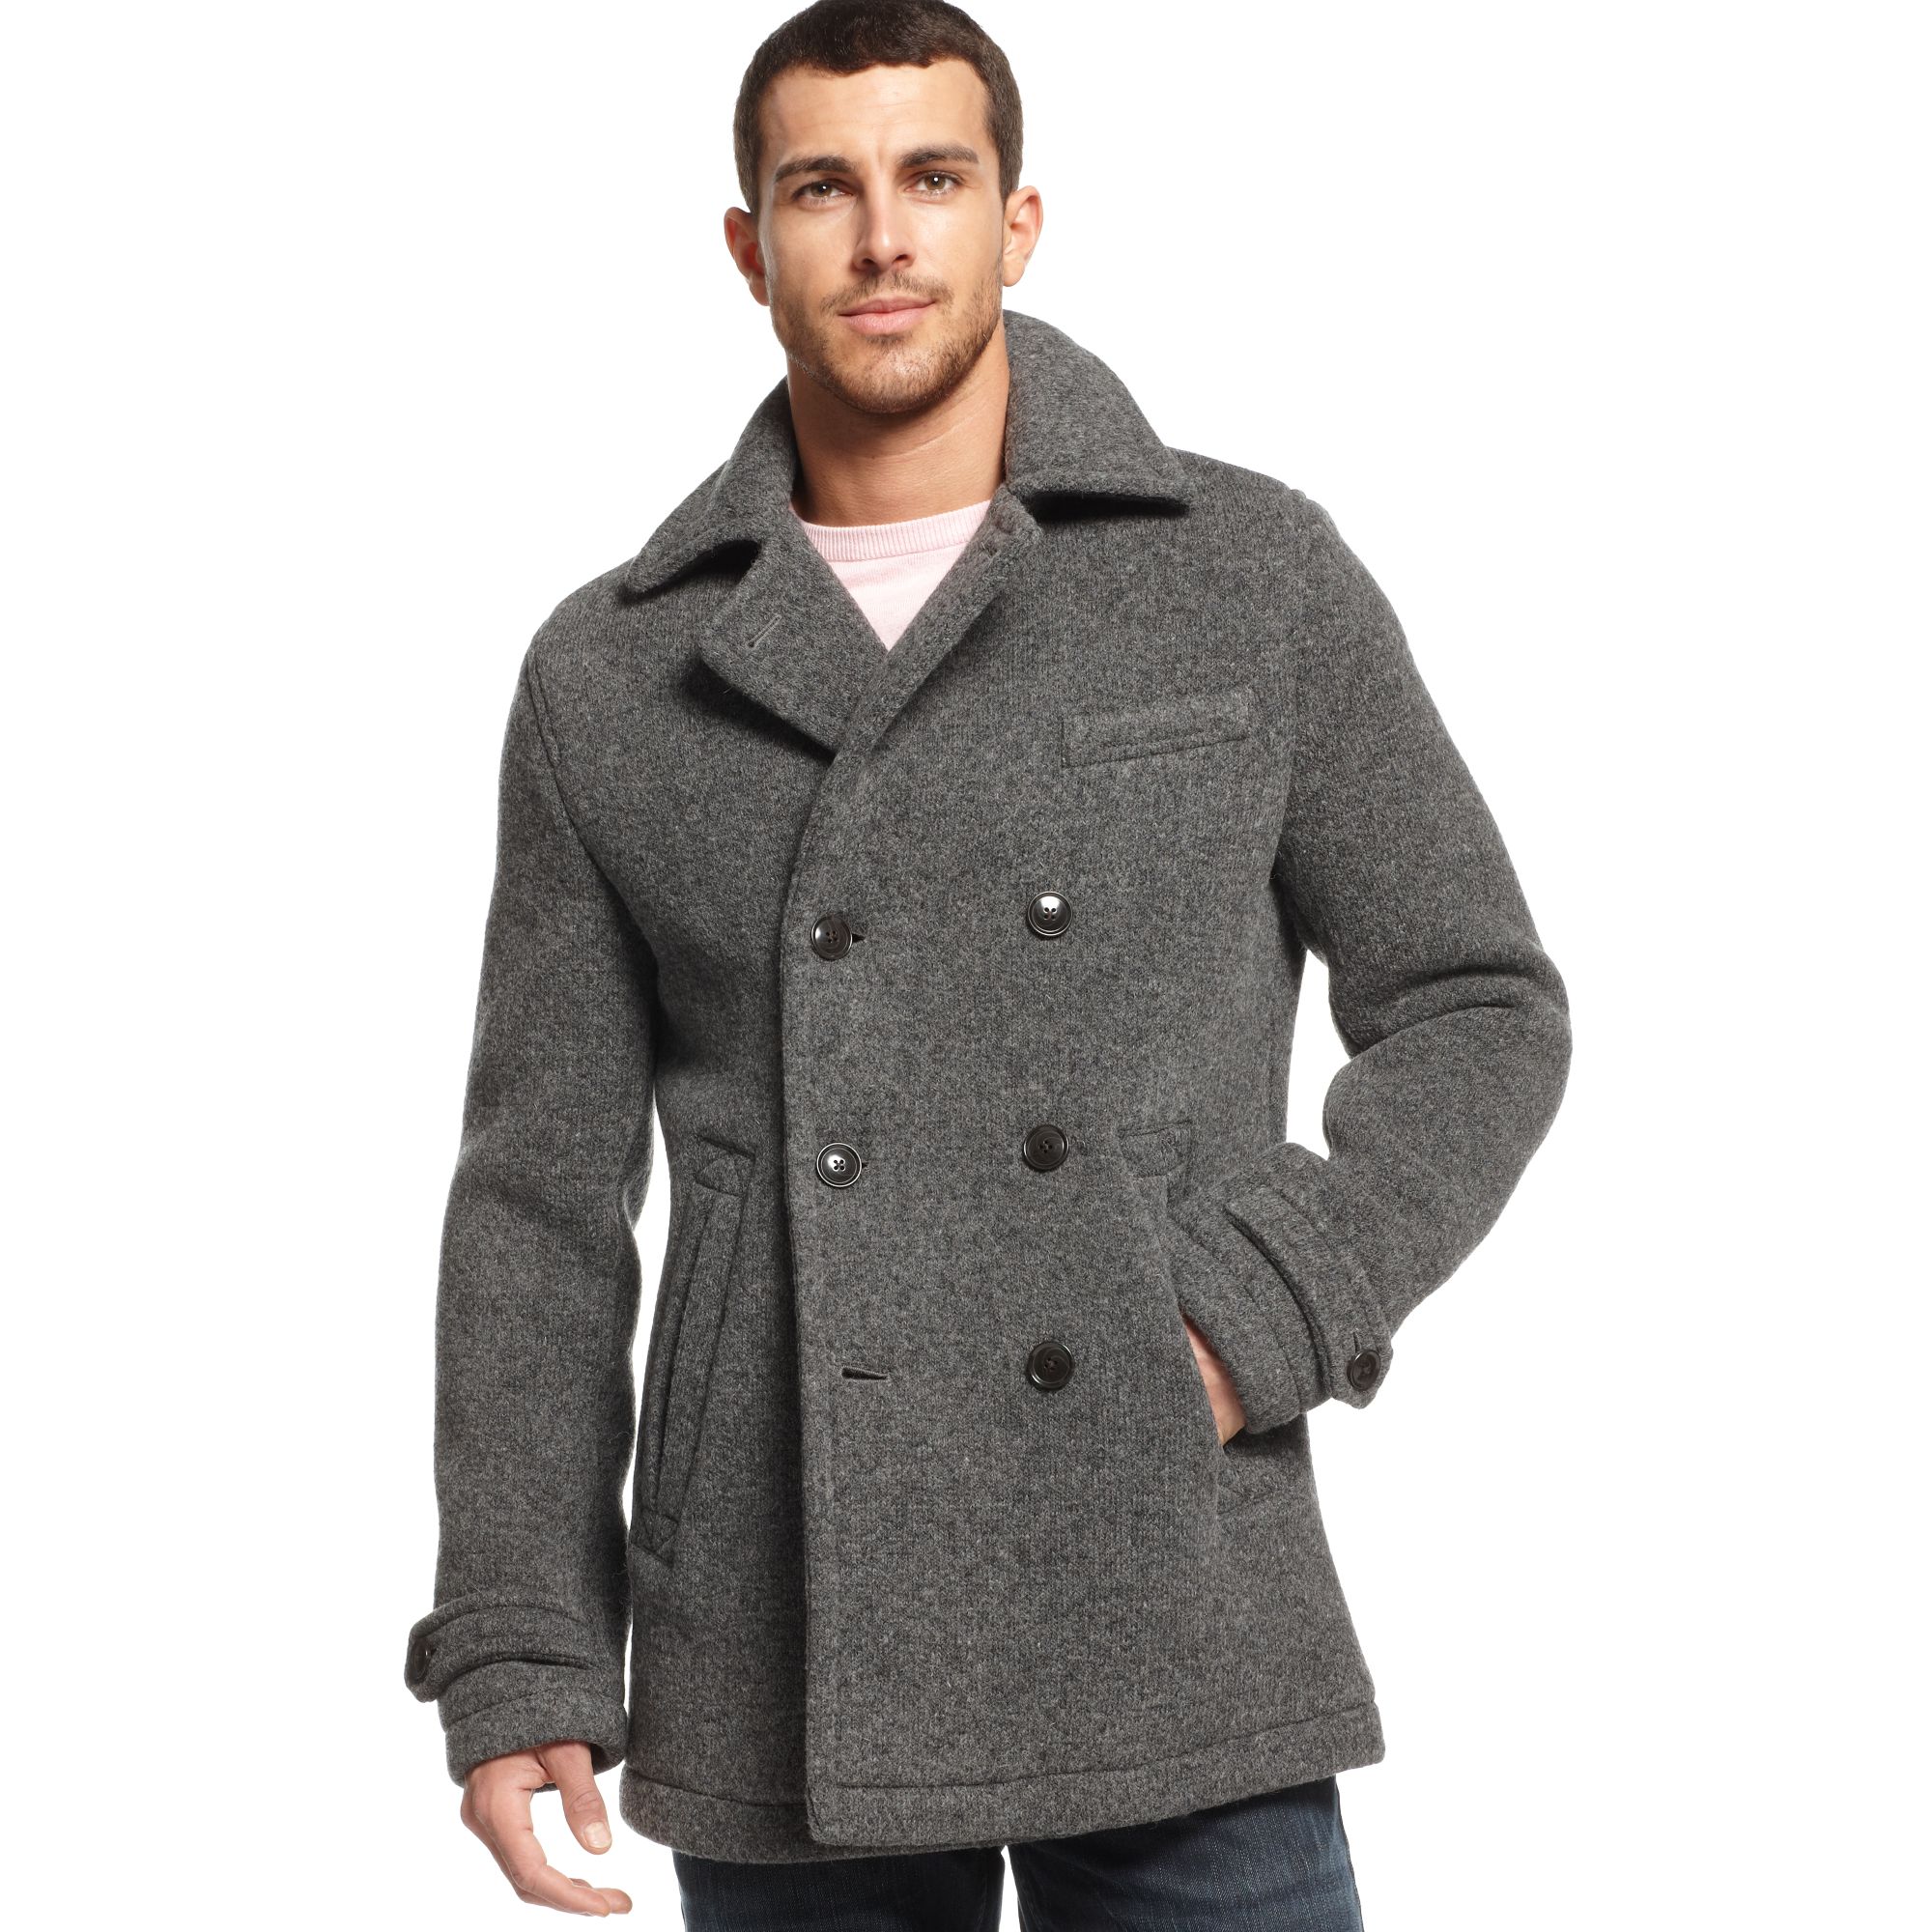 Lyst - Tommy Hilfiger Peacoat in Gray for Men